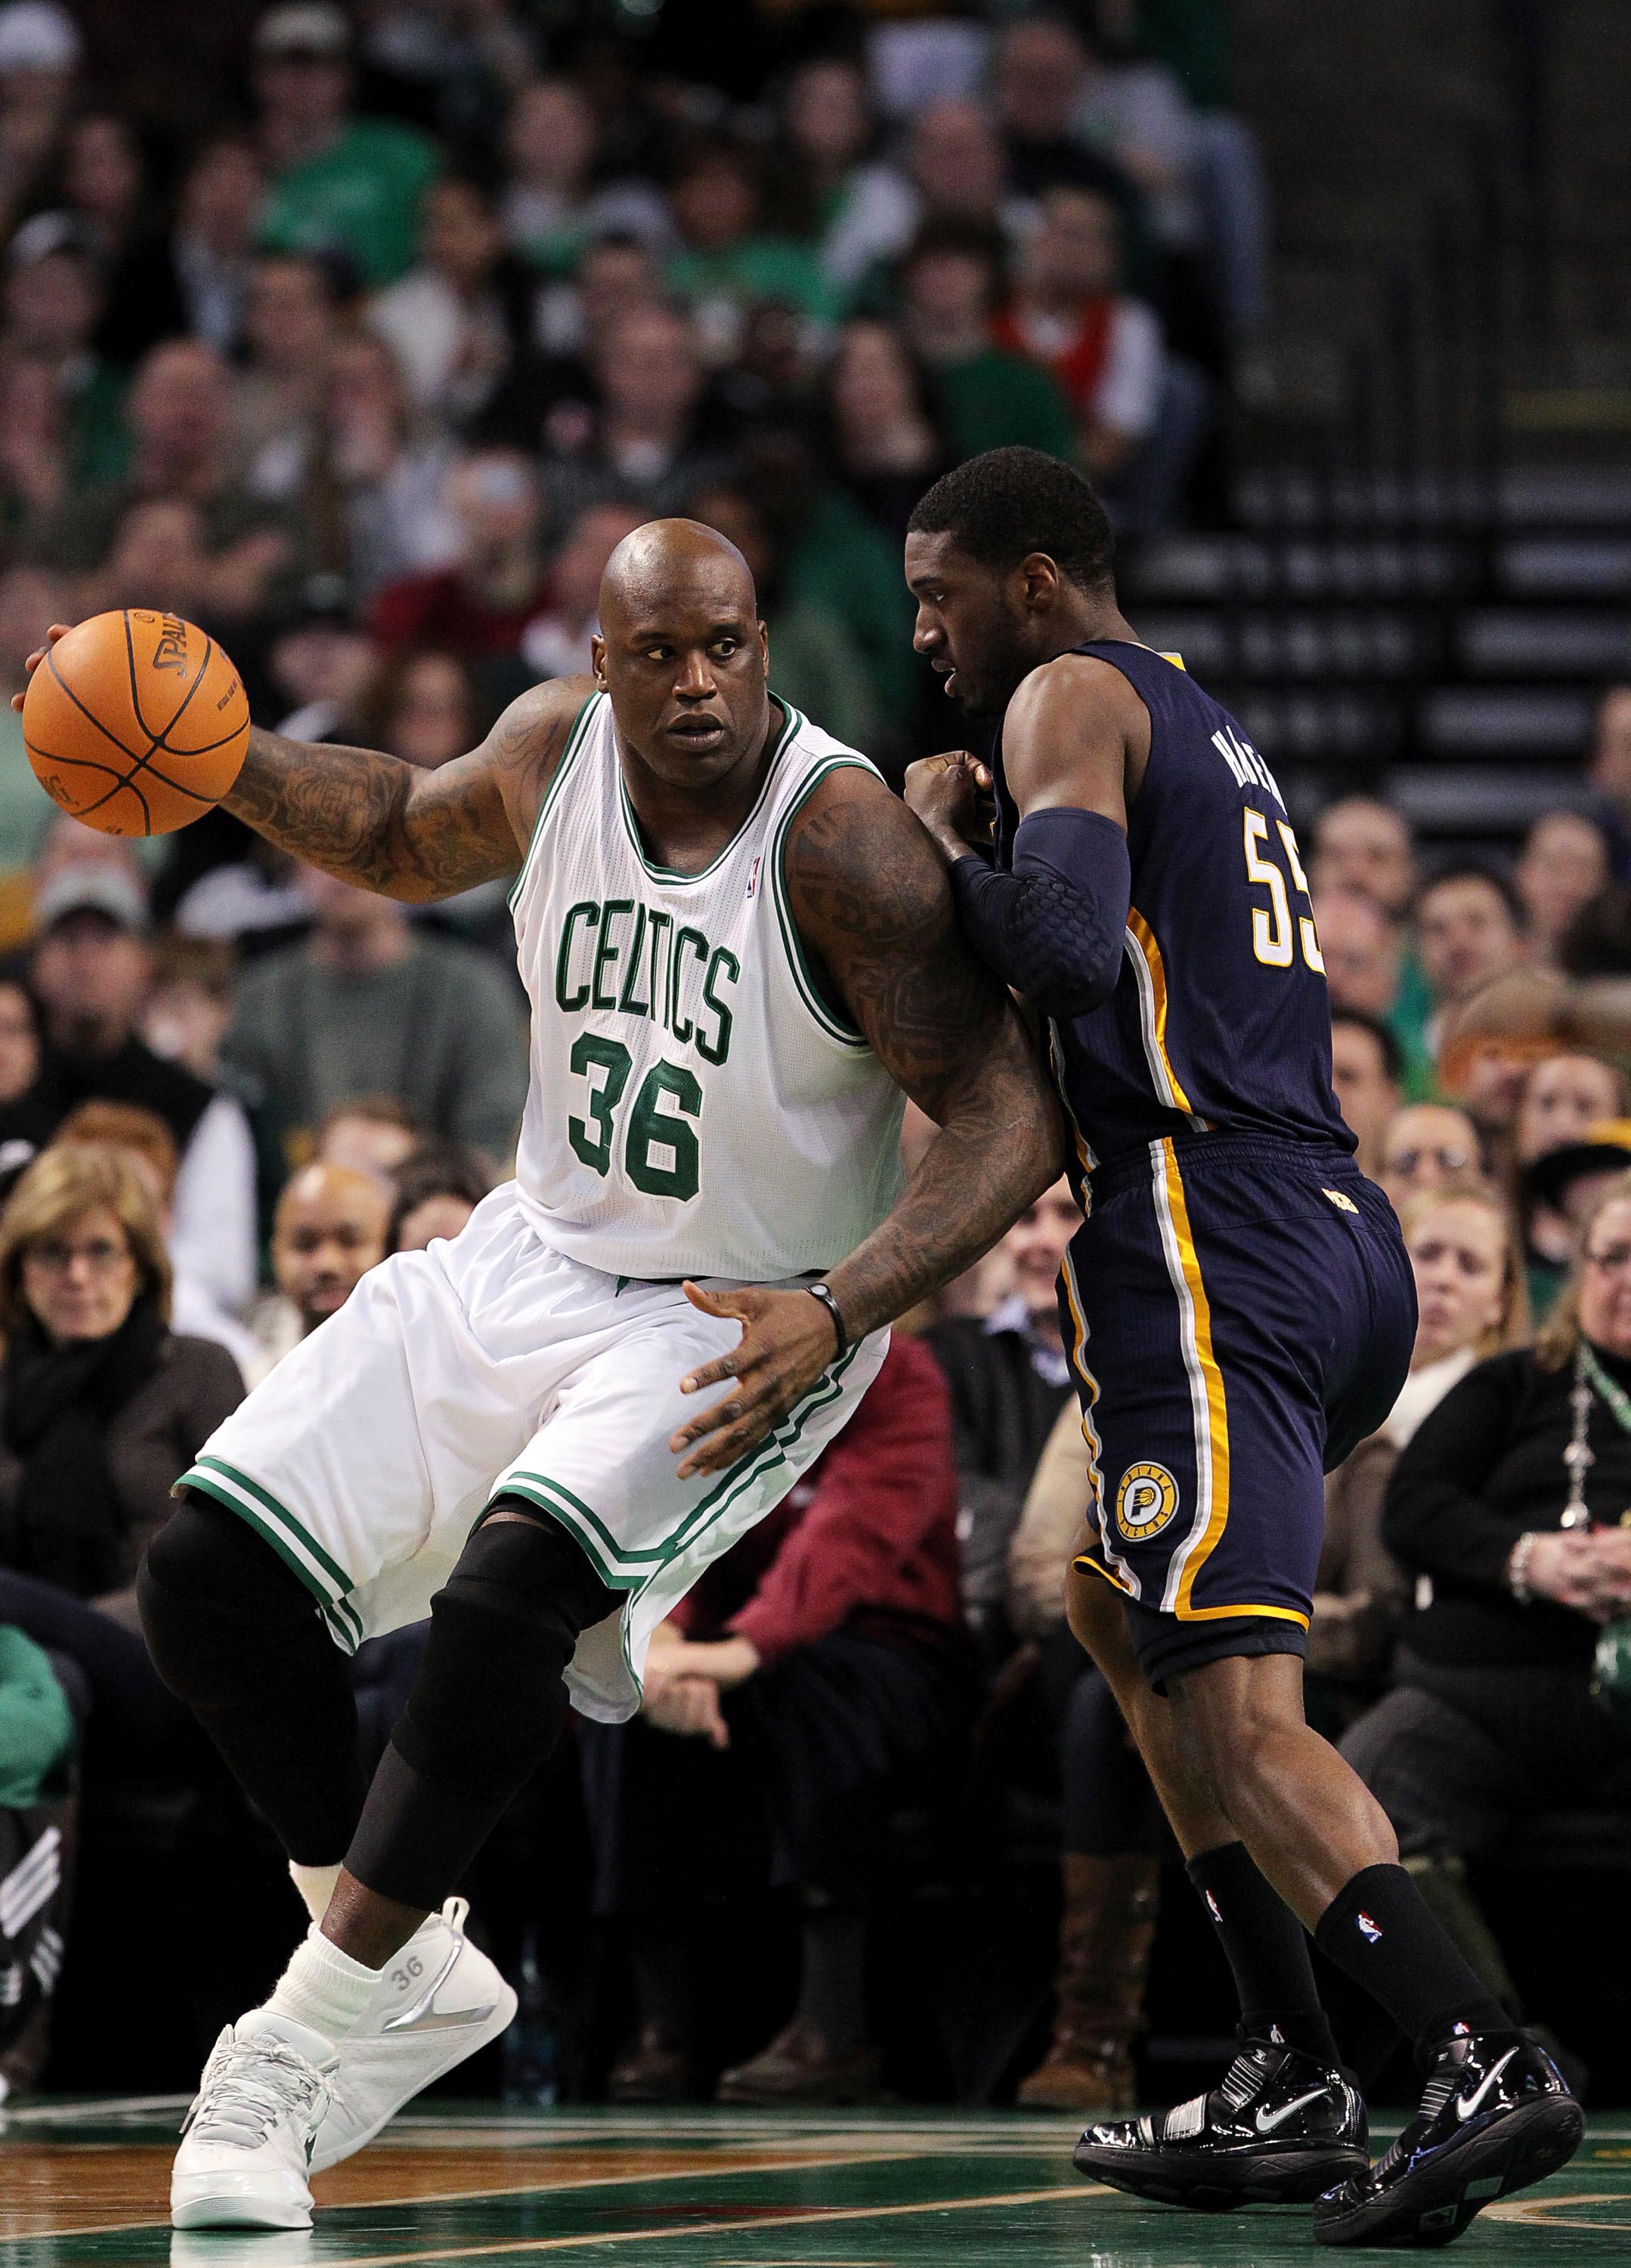 Celtics' personality will be different with Shaquille O'Neal aboard